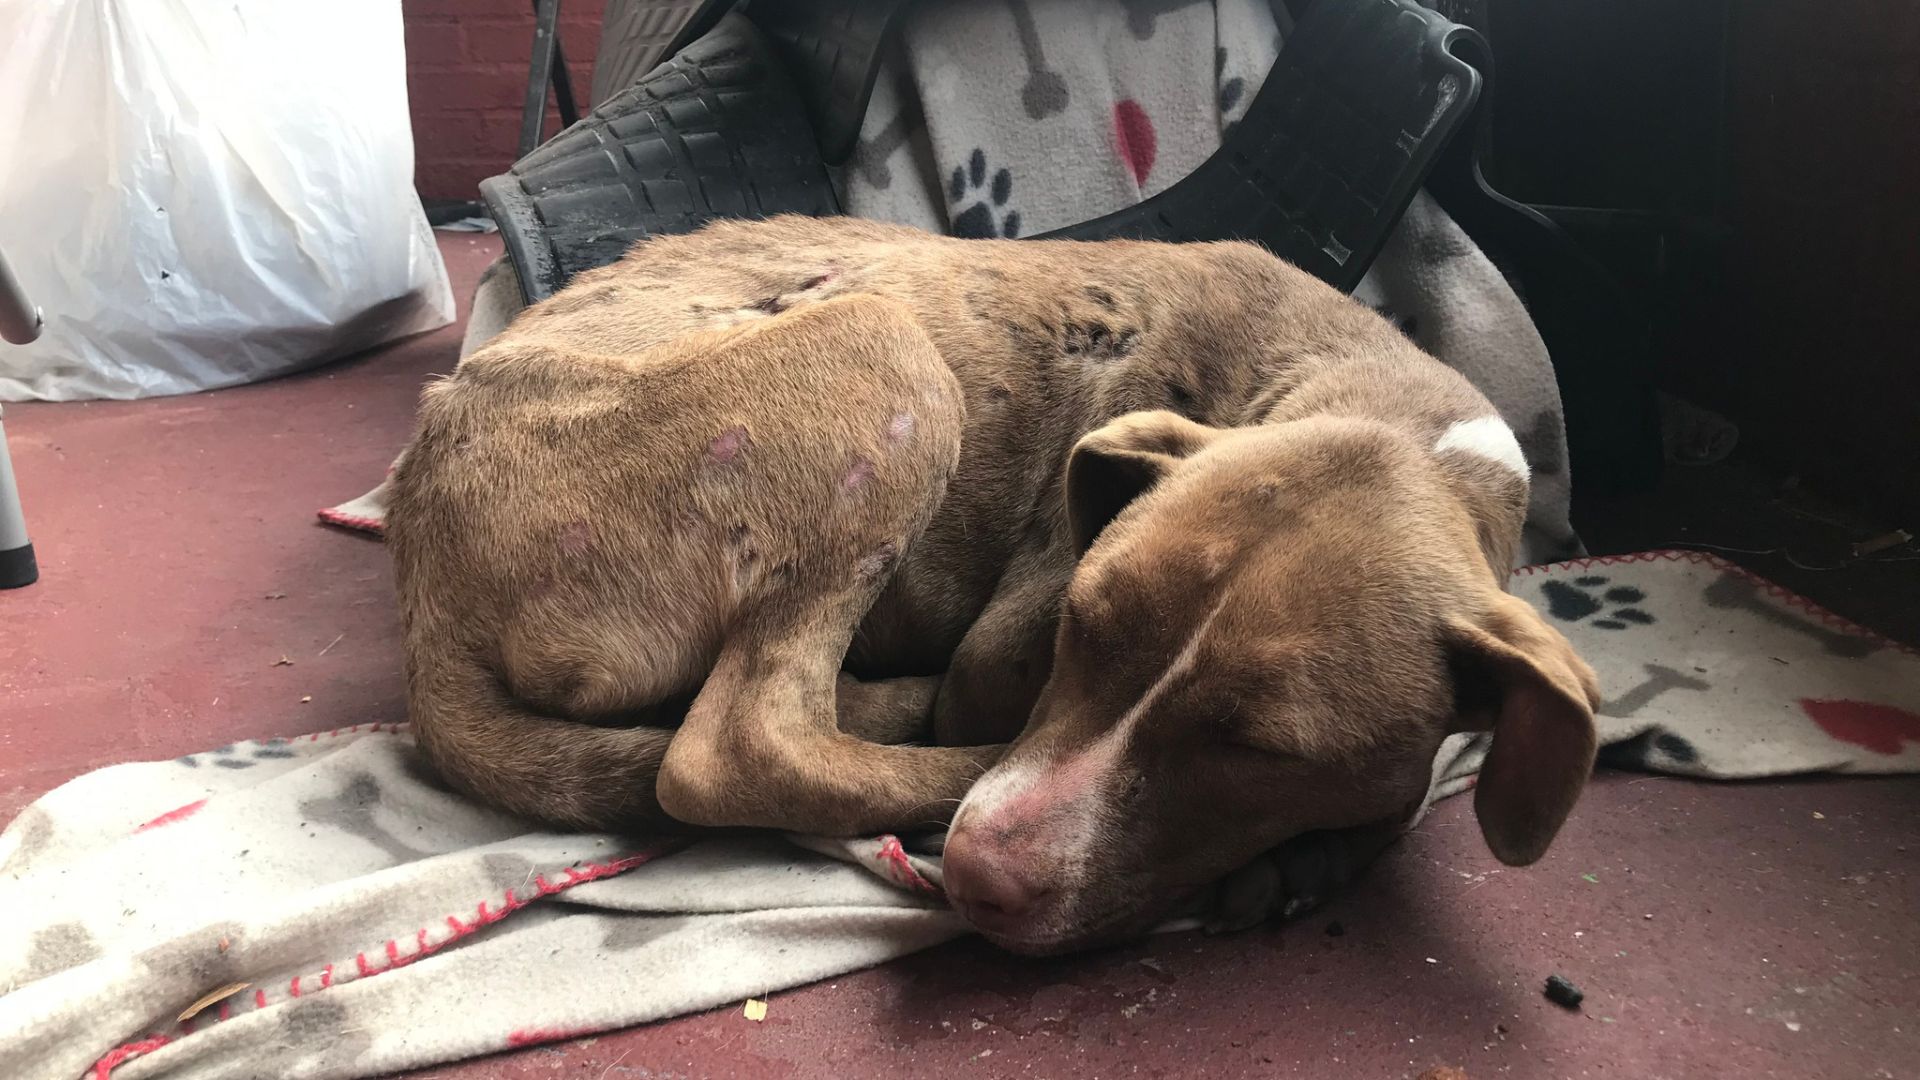 Sweet Dog Was Sad And Injured So He Curled Up On A Woman’s Porch In Hopes Of Getting Help